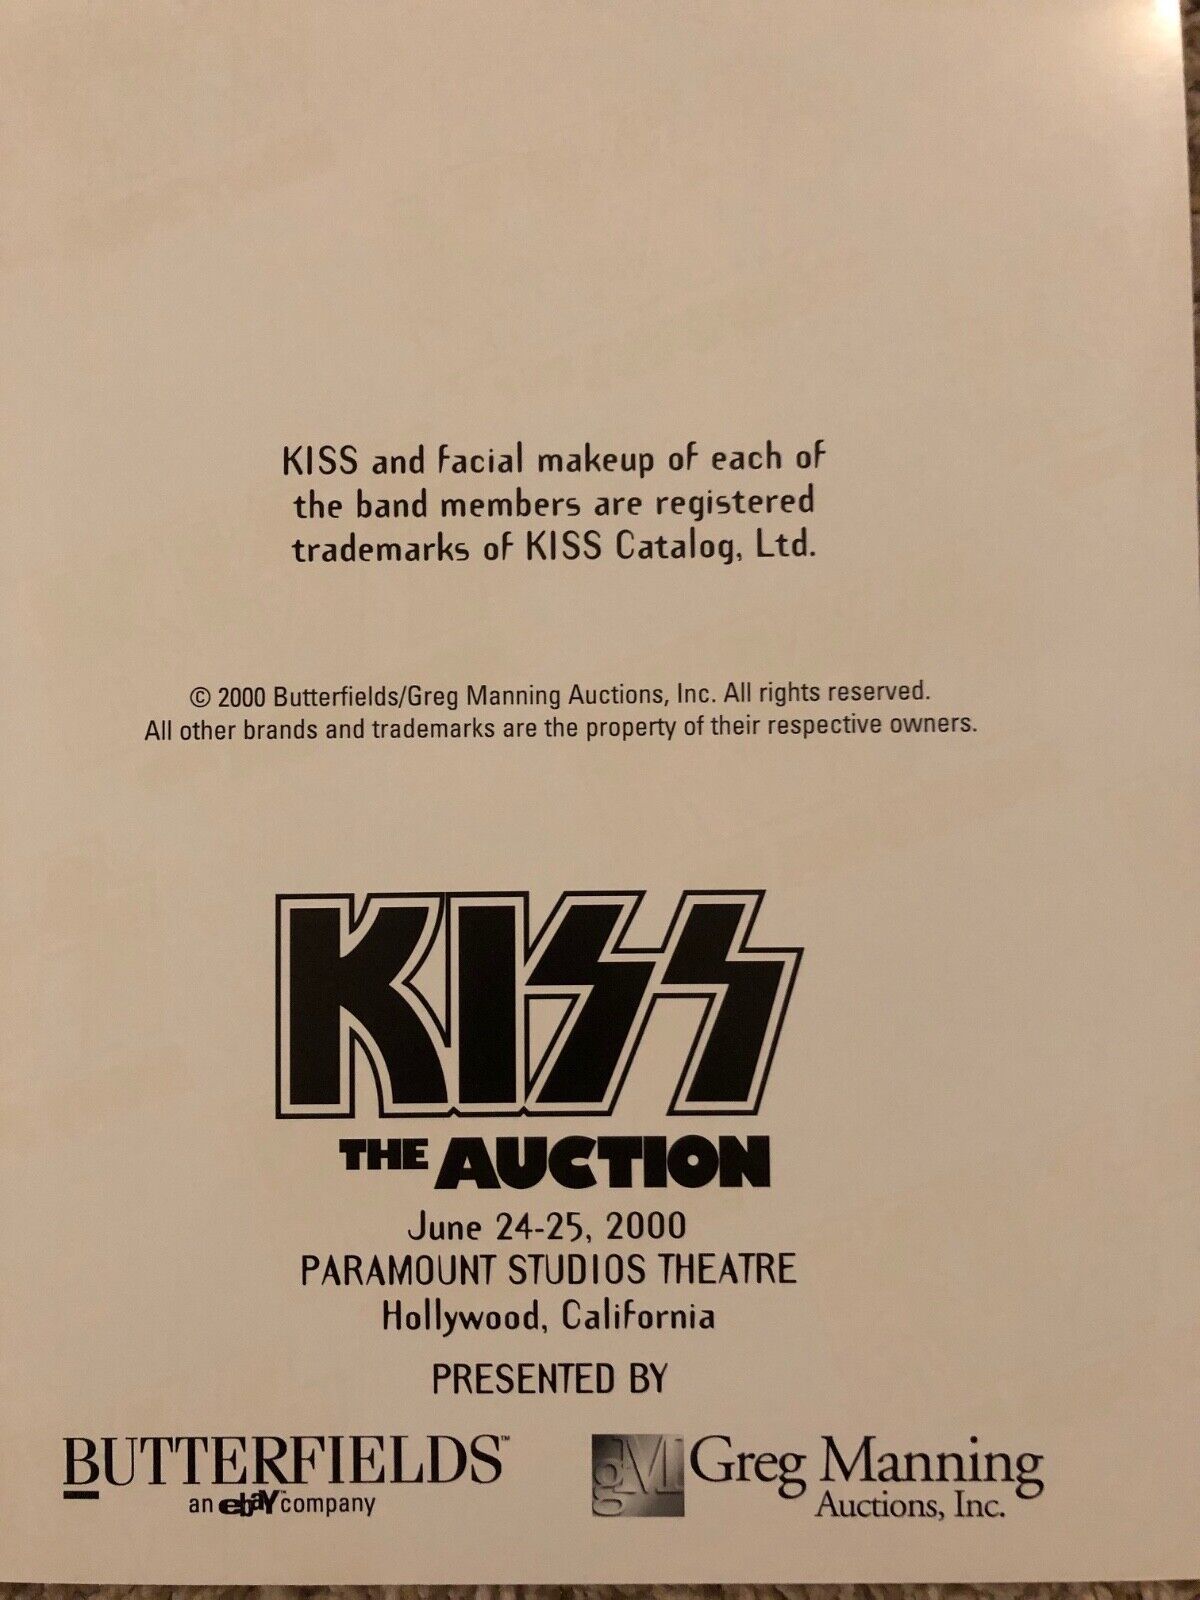 KISS individual photo signed by Gene Simmons and Paul Stanle (4 pictures) JSA Без бренда - фотография #10